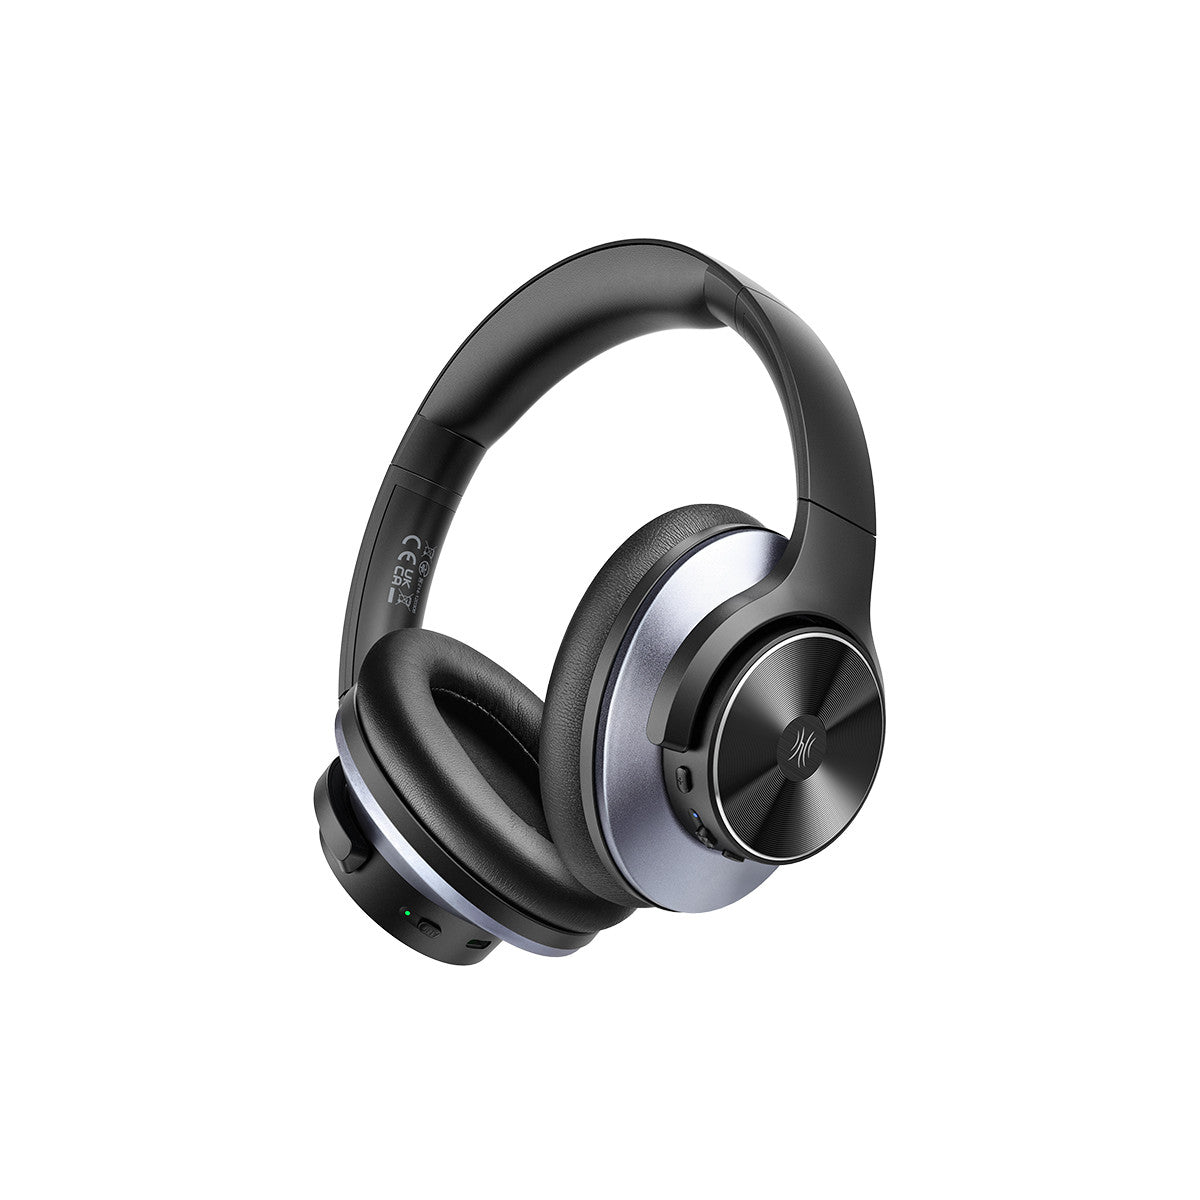 Oneodio A70 Bluetooth Noise Cancelling Wireless Headphones Over Ear Black